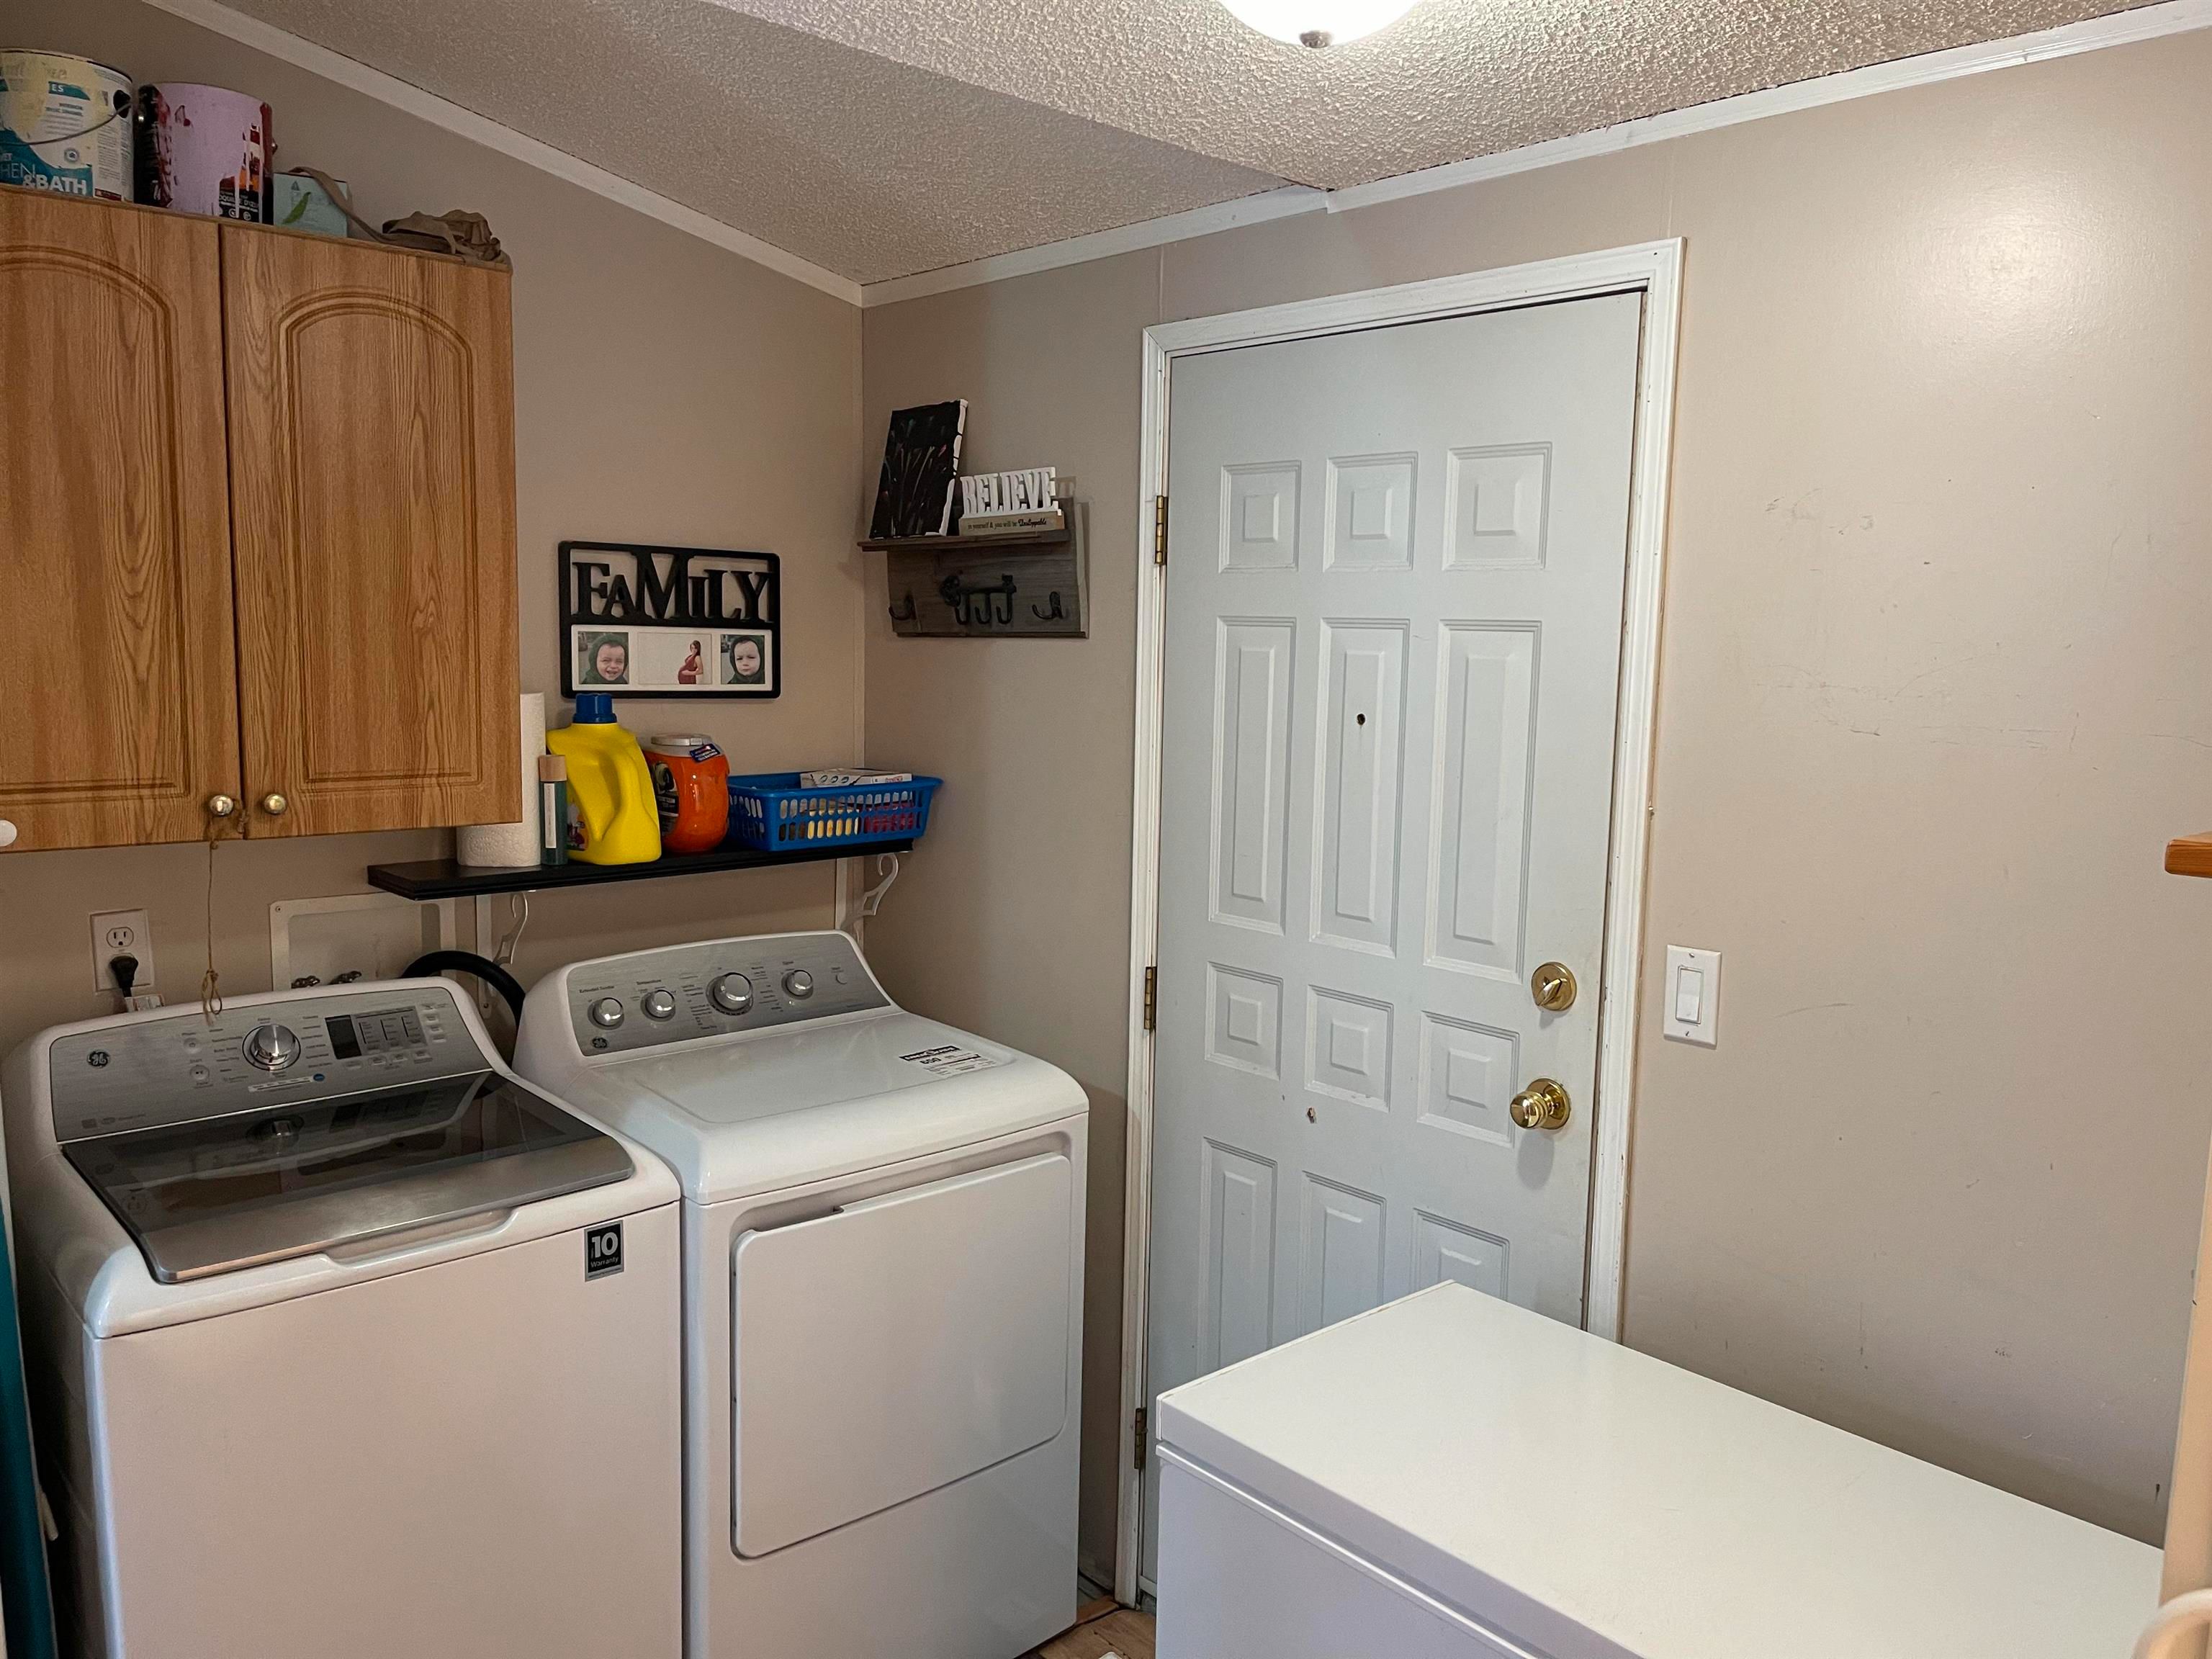 Photo 13: Photos: 10339 99 Street: Taylor Manufactured Home for sale (Fort St. John)  : MLS®# R2632849